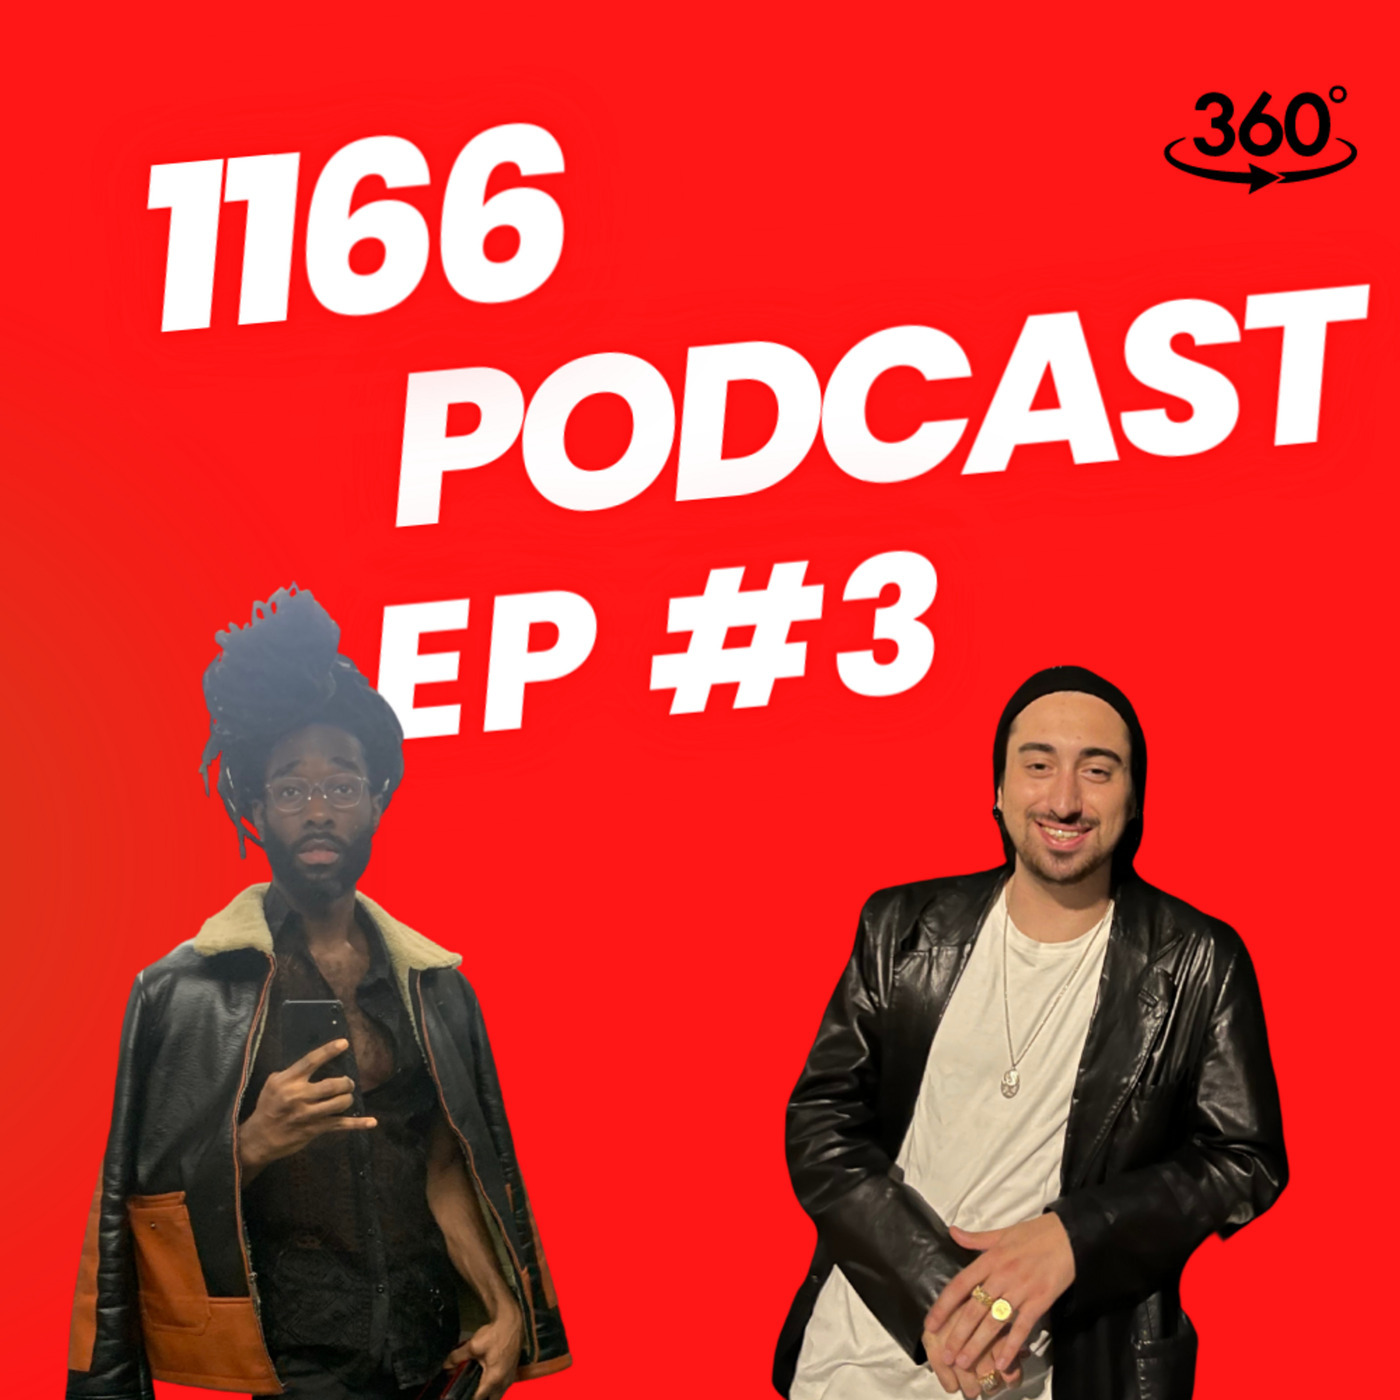 1166 Podcast 1166-ep3: Episode 3: Self Purpose, VR, The Future of Content Creation| 1166 Podcast